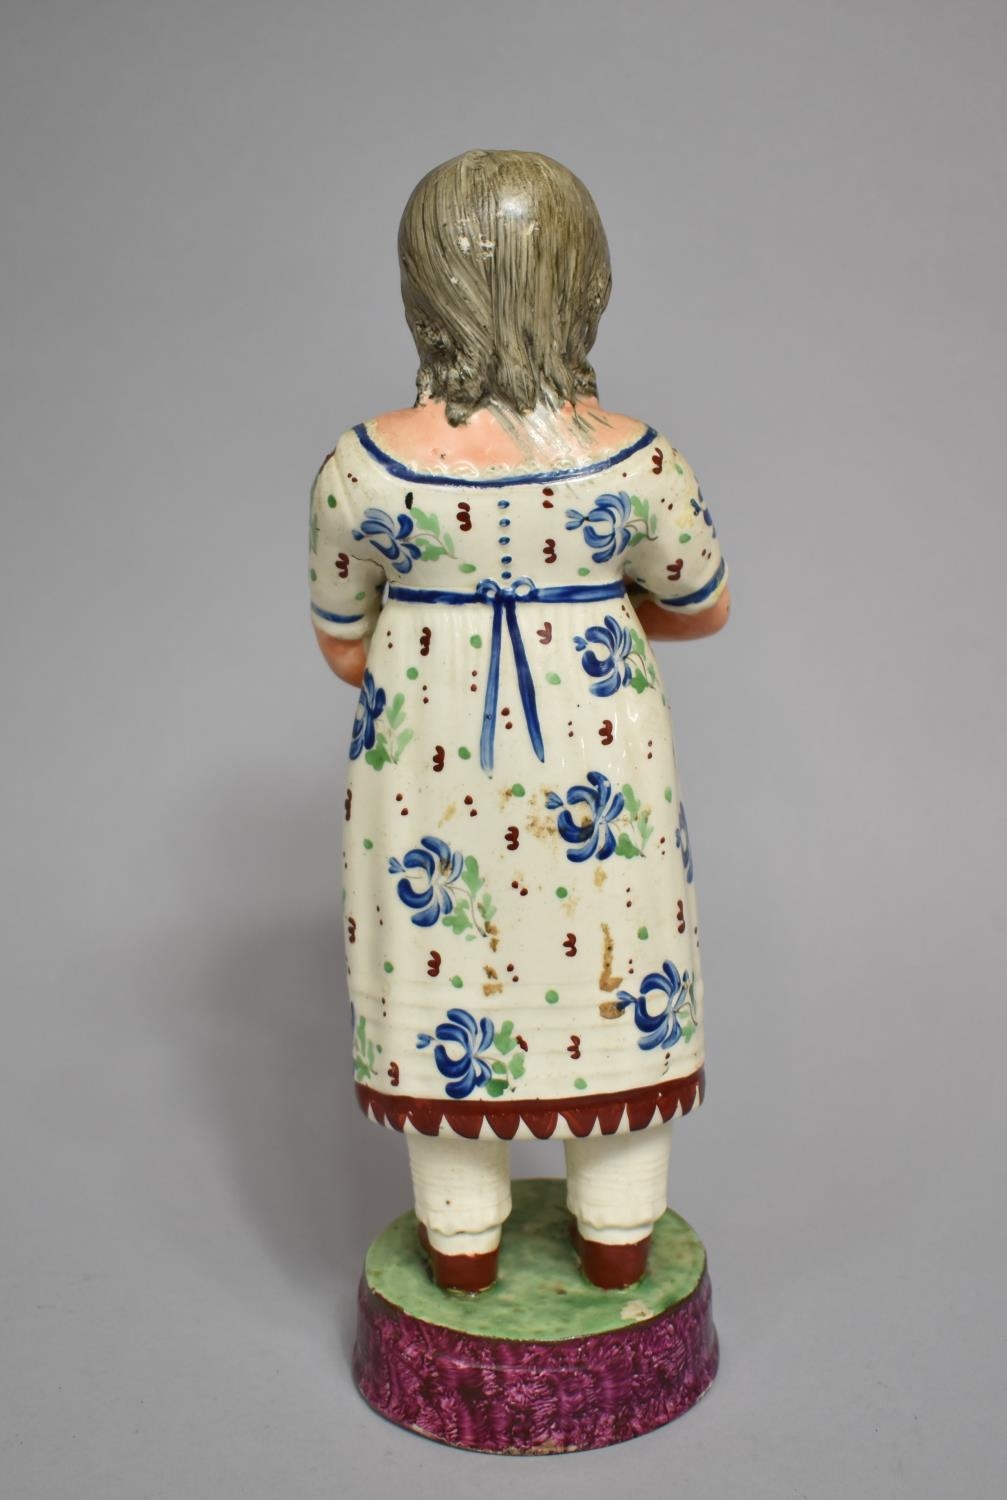 A Large 19th Century Pearlware Figure, Possibly Staffordshire, Mother Standing Holding Baby (Loss to - Image 3 of 3